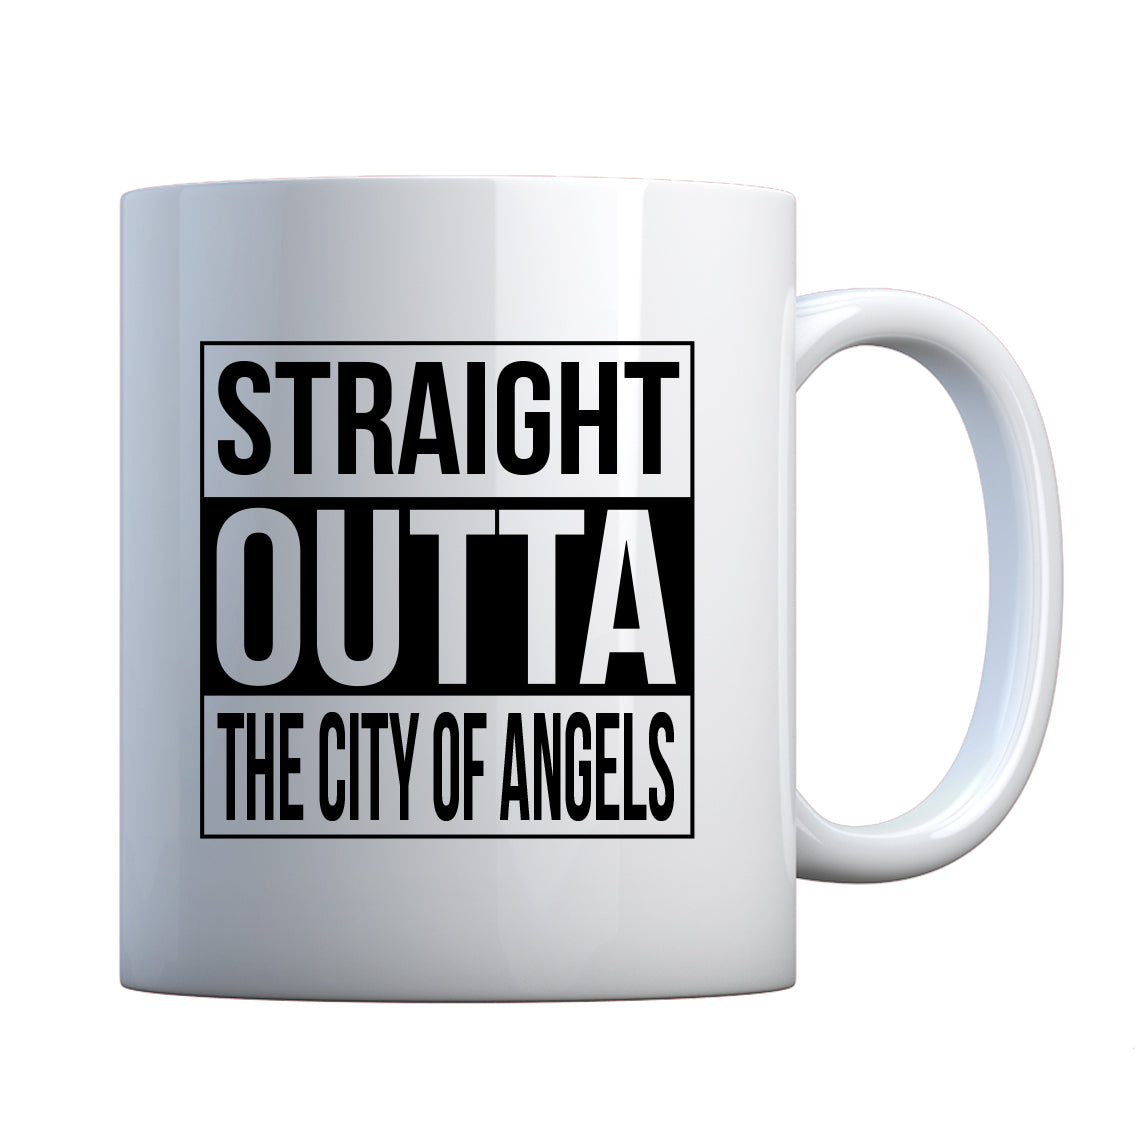 Straight Outta The City of Angels Ceramic Gift Mug